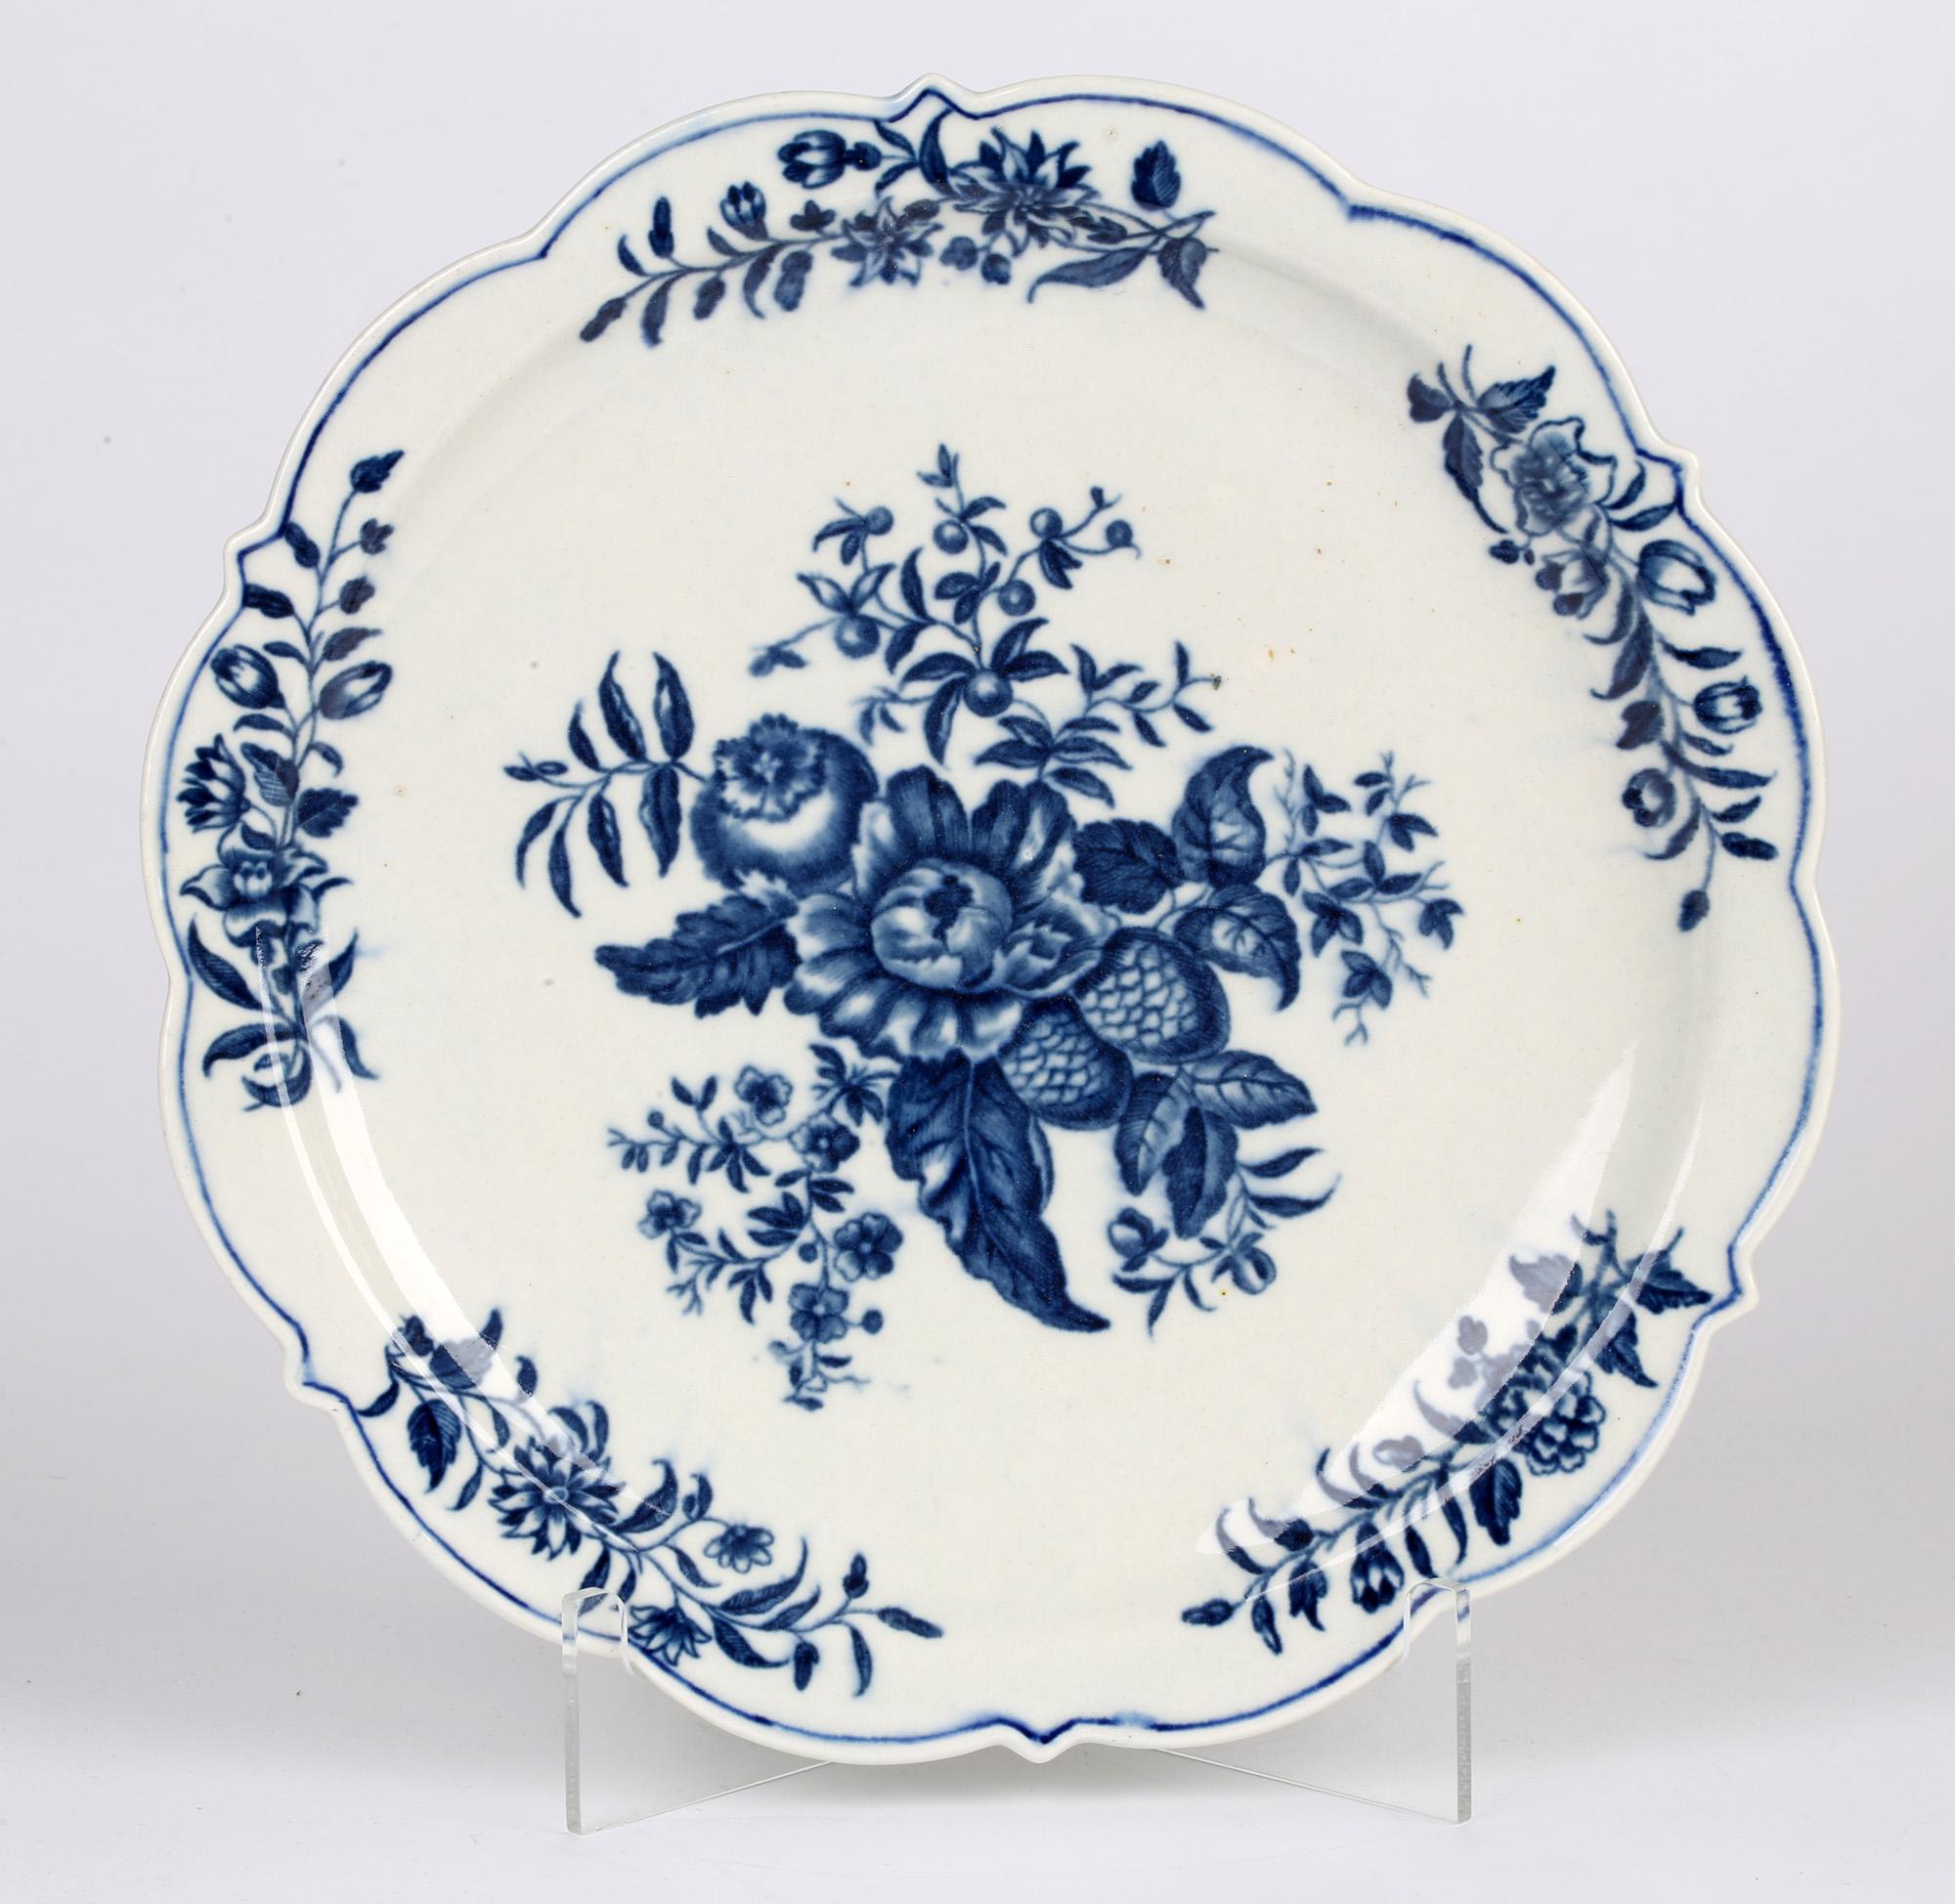 Worcester Early Dr Wall Period Pine Cone Porcelain Plate, circa 1760 1